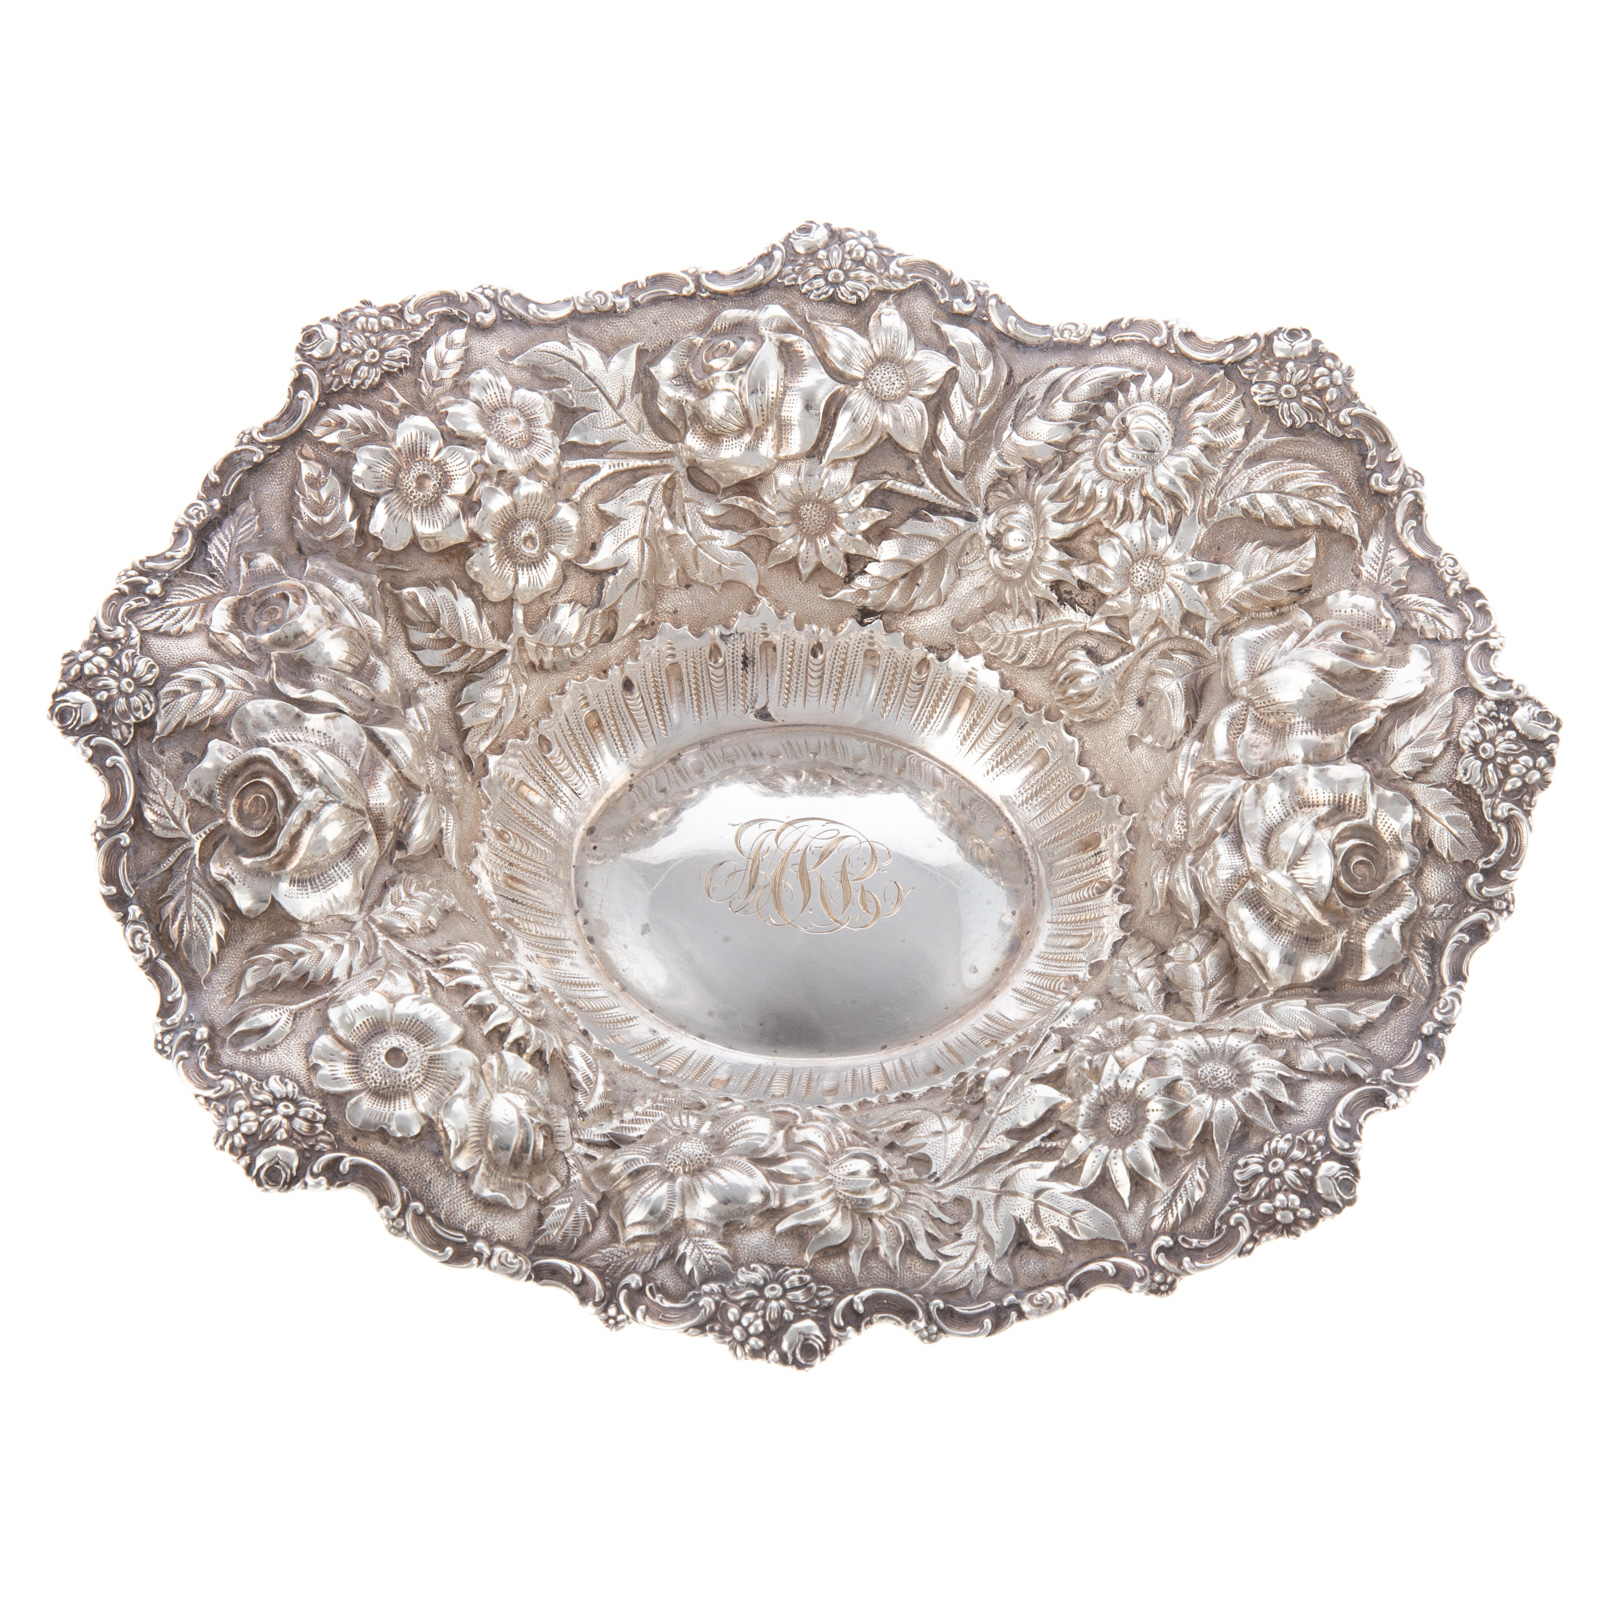 STIEFF STERLING REPOUSSE DISH Model#